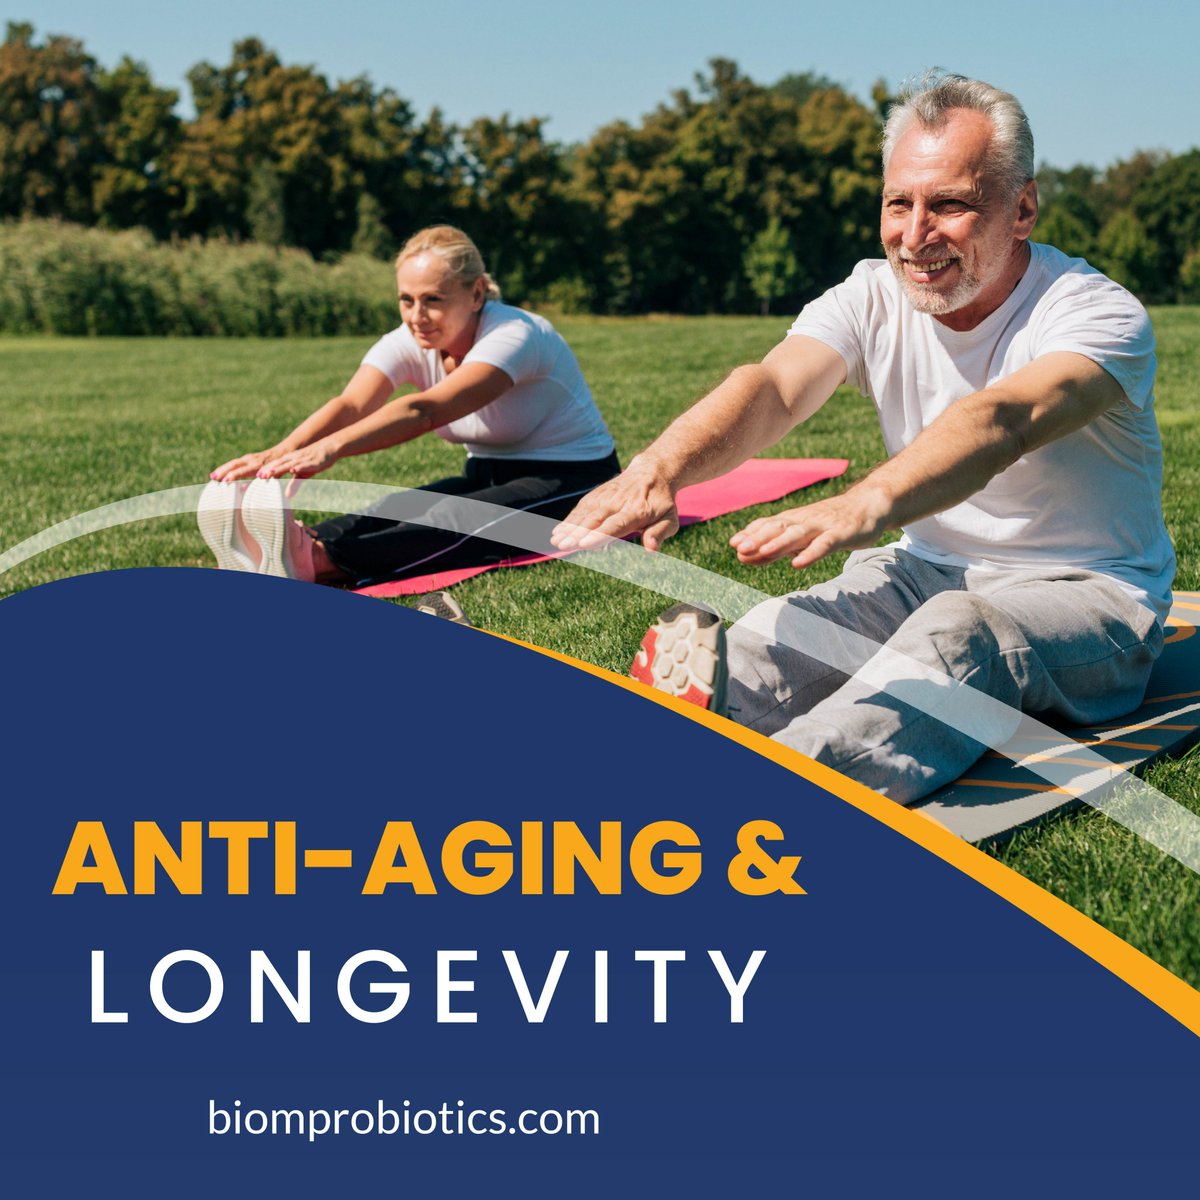 NMN is a precursor to NAD+, a crucial molecule for cellular energy production and DNA repair, while Pterostilbene, a compound found in blueberries, supports cognitive function and cardiovascular health.

Buy: bit.ly/3EJC4KW 

#biomprobiotics #biomnmn #biom #wellness